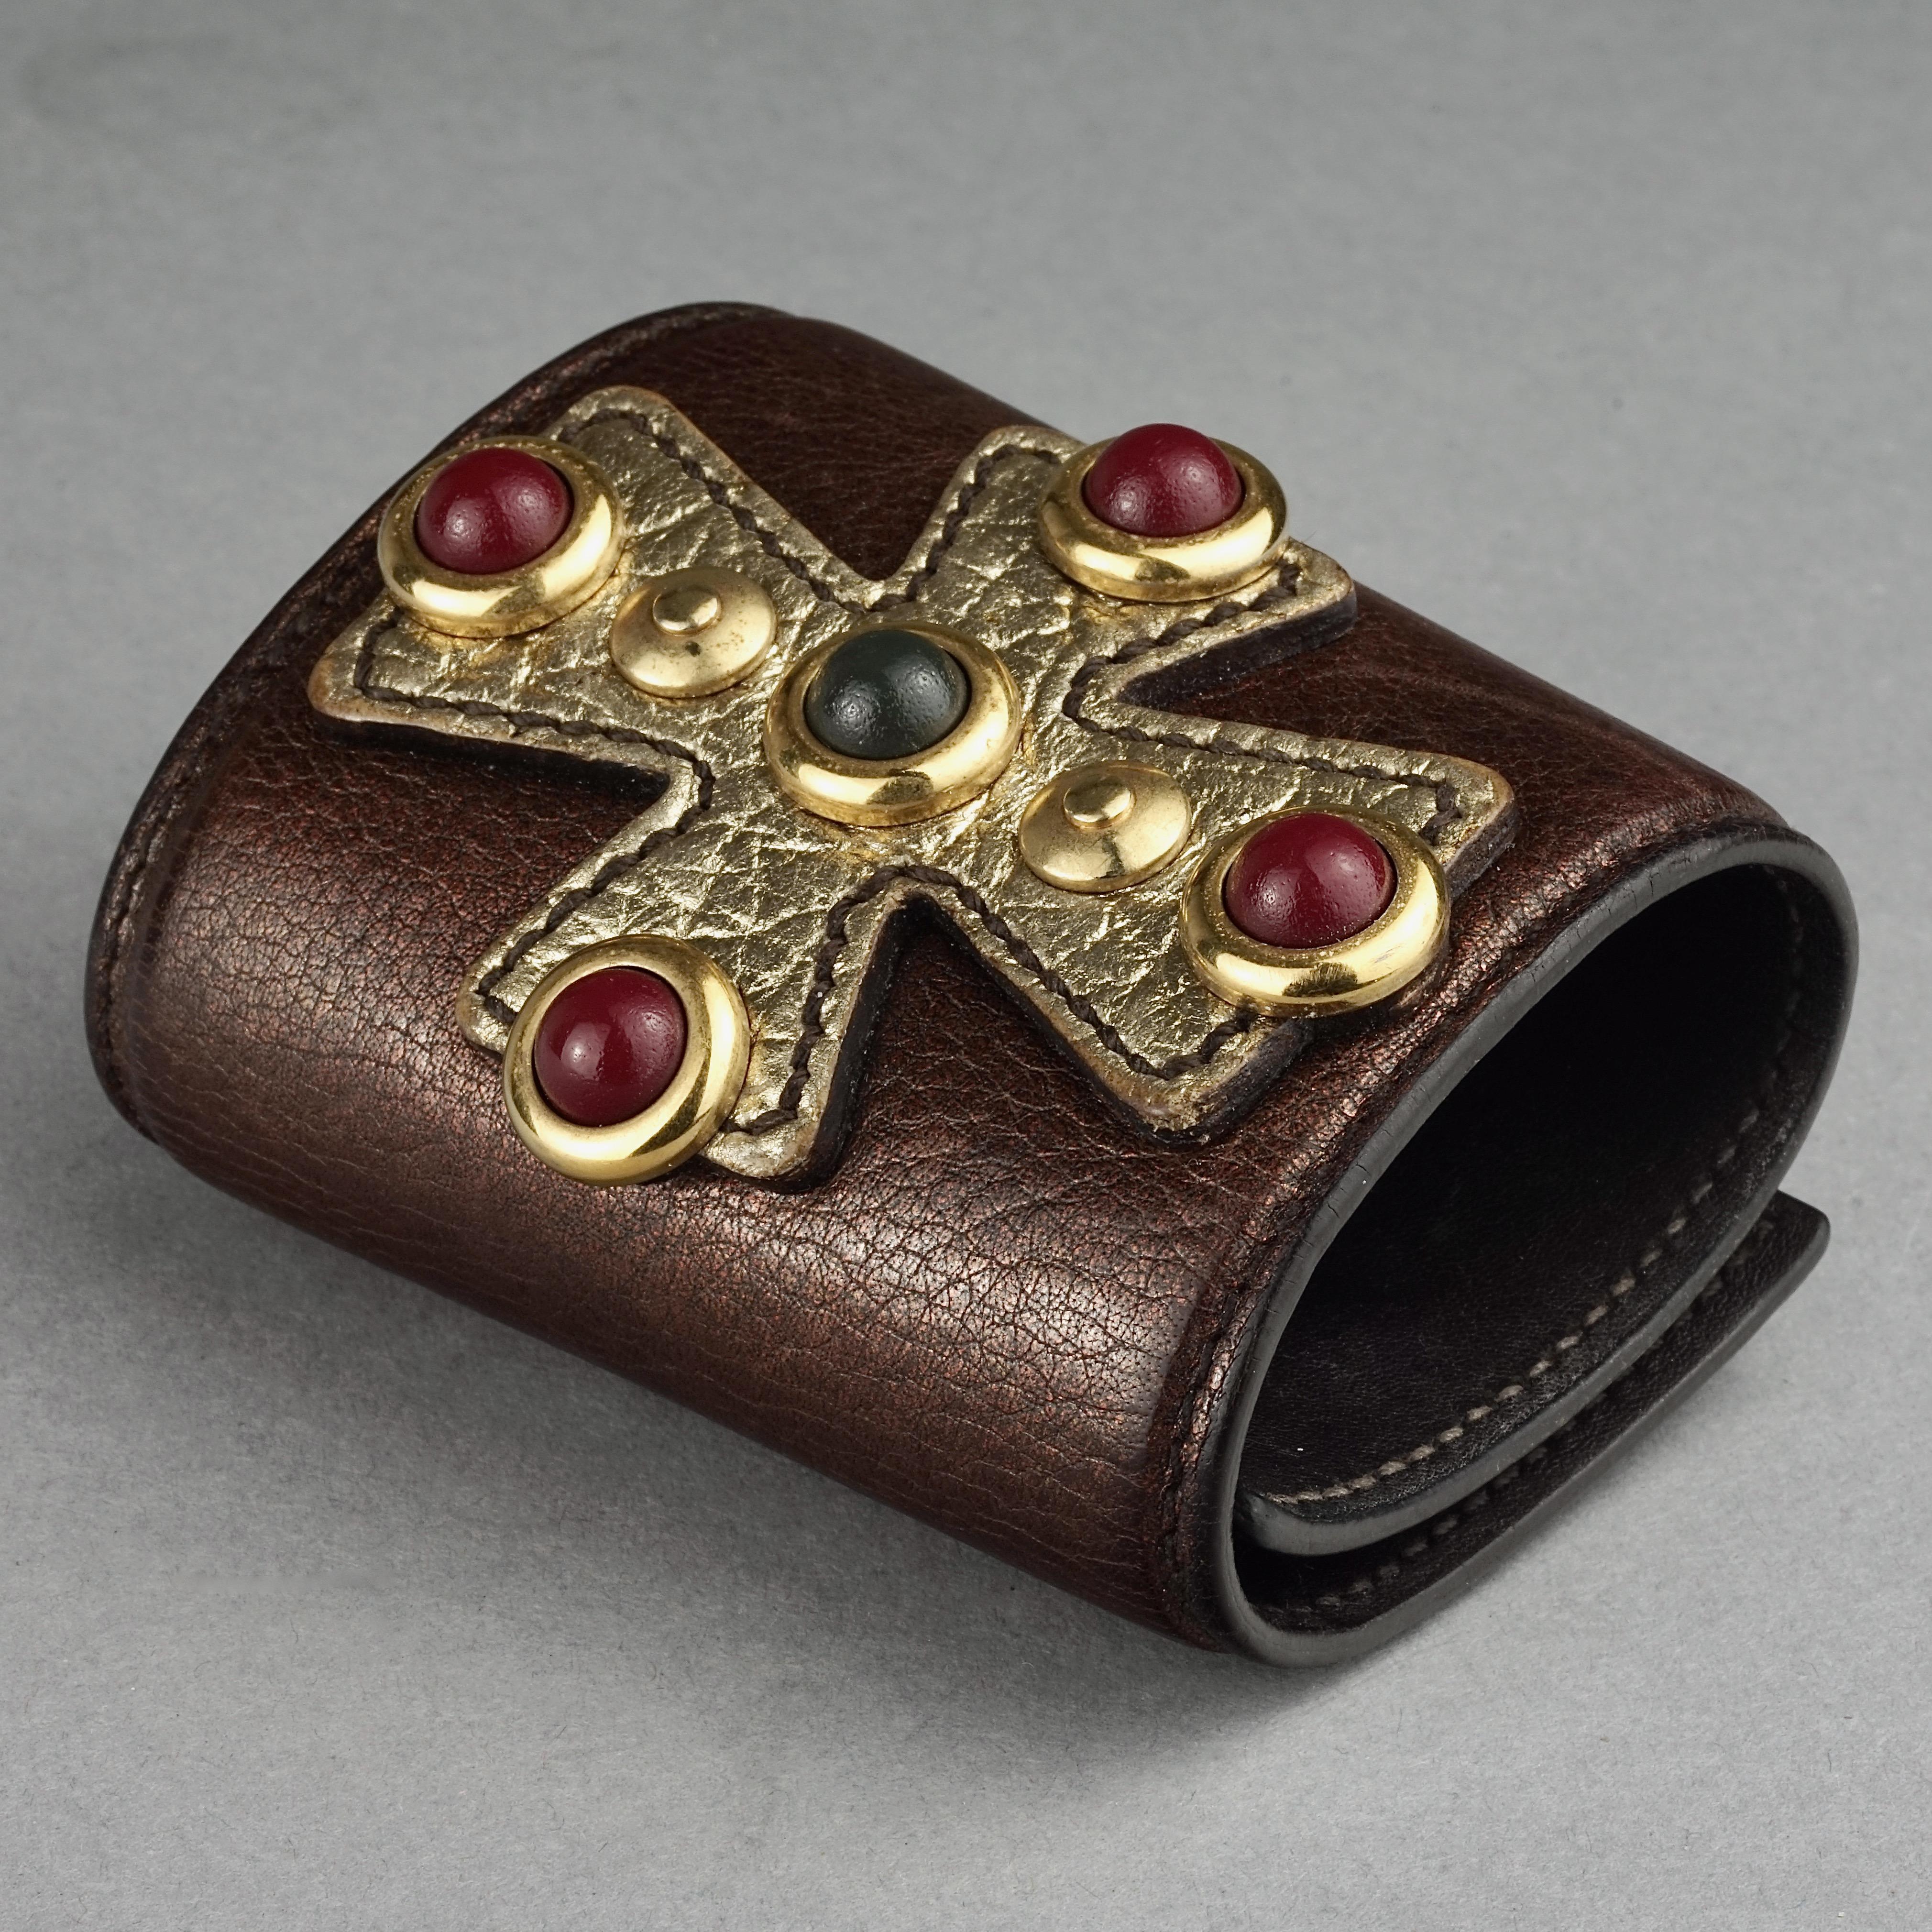 Yves Saint Laurent YSL Maltese Cross Cabochon Leather Cuff Bracelet In Good Condition For Sale In Kingersheim, Alsace